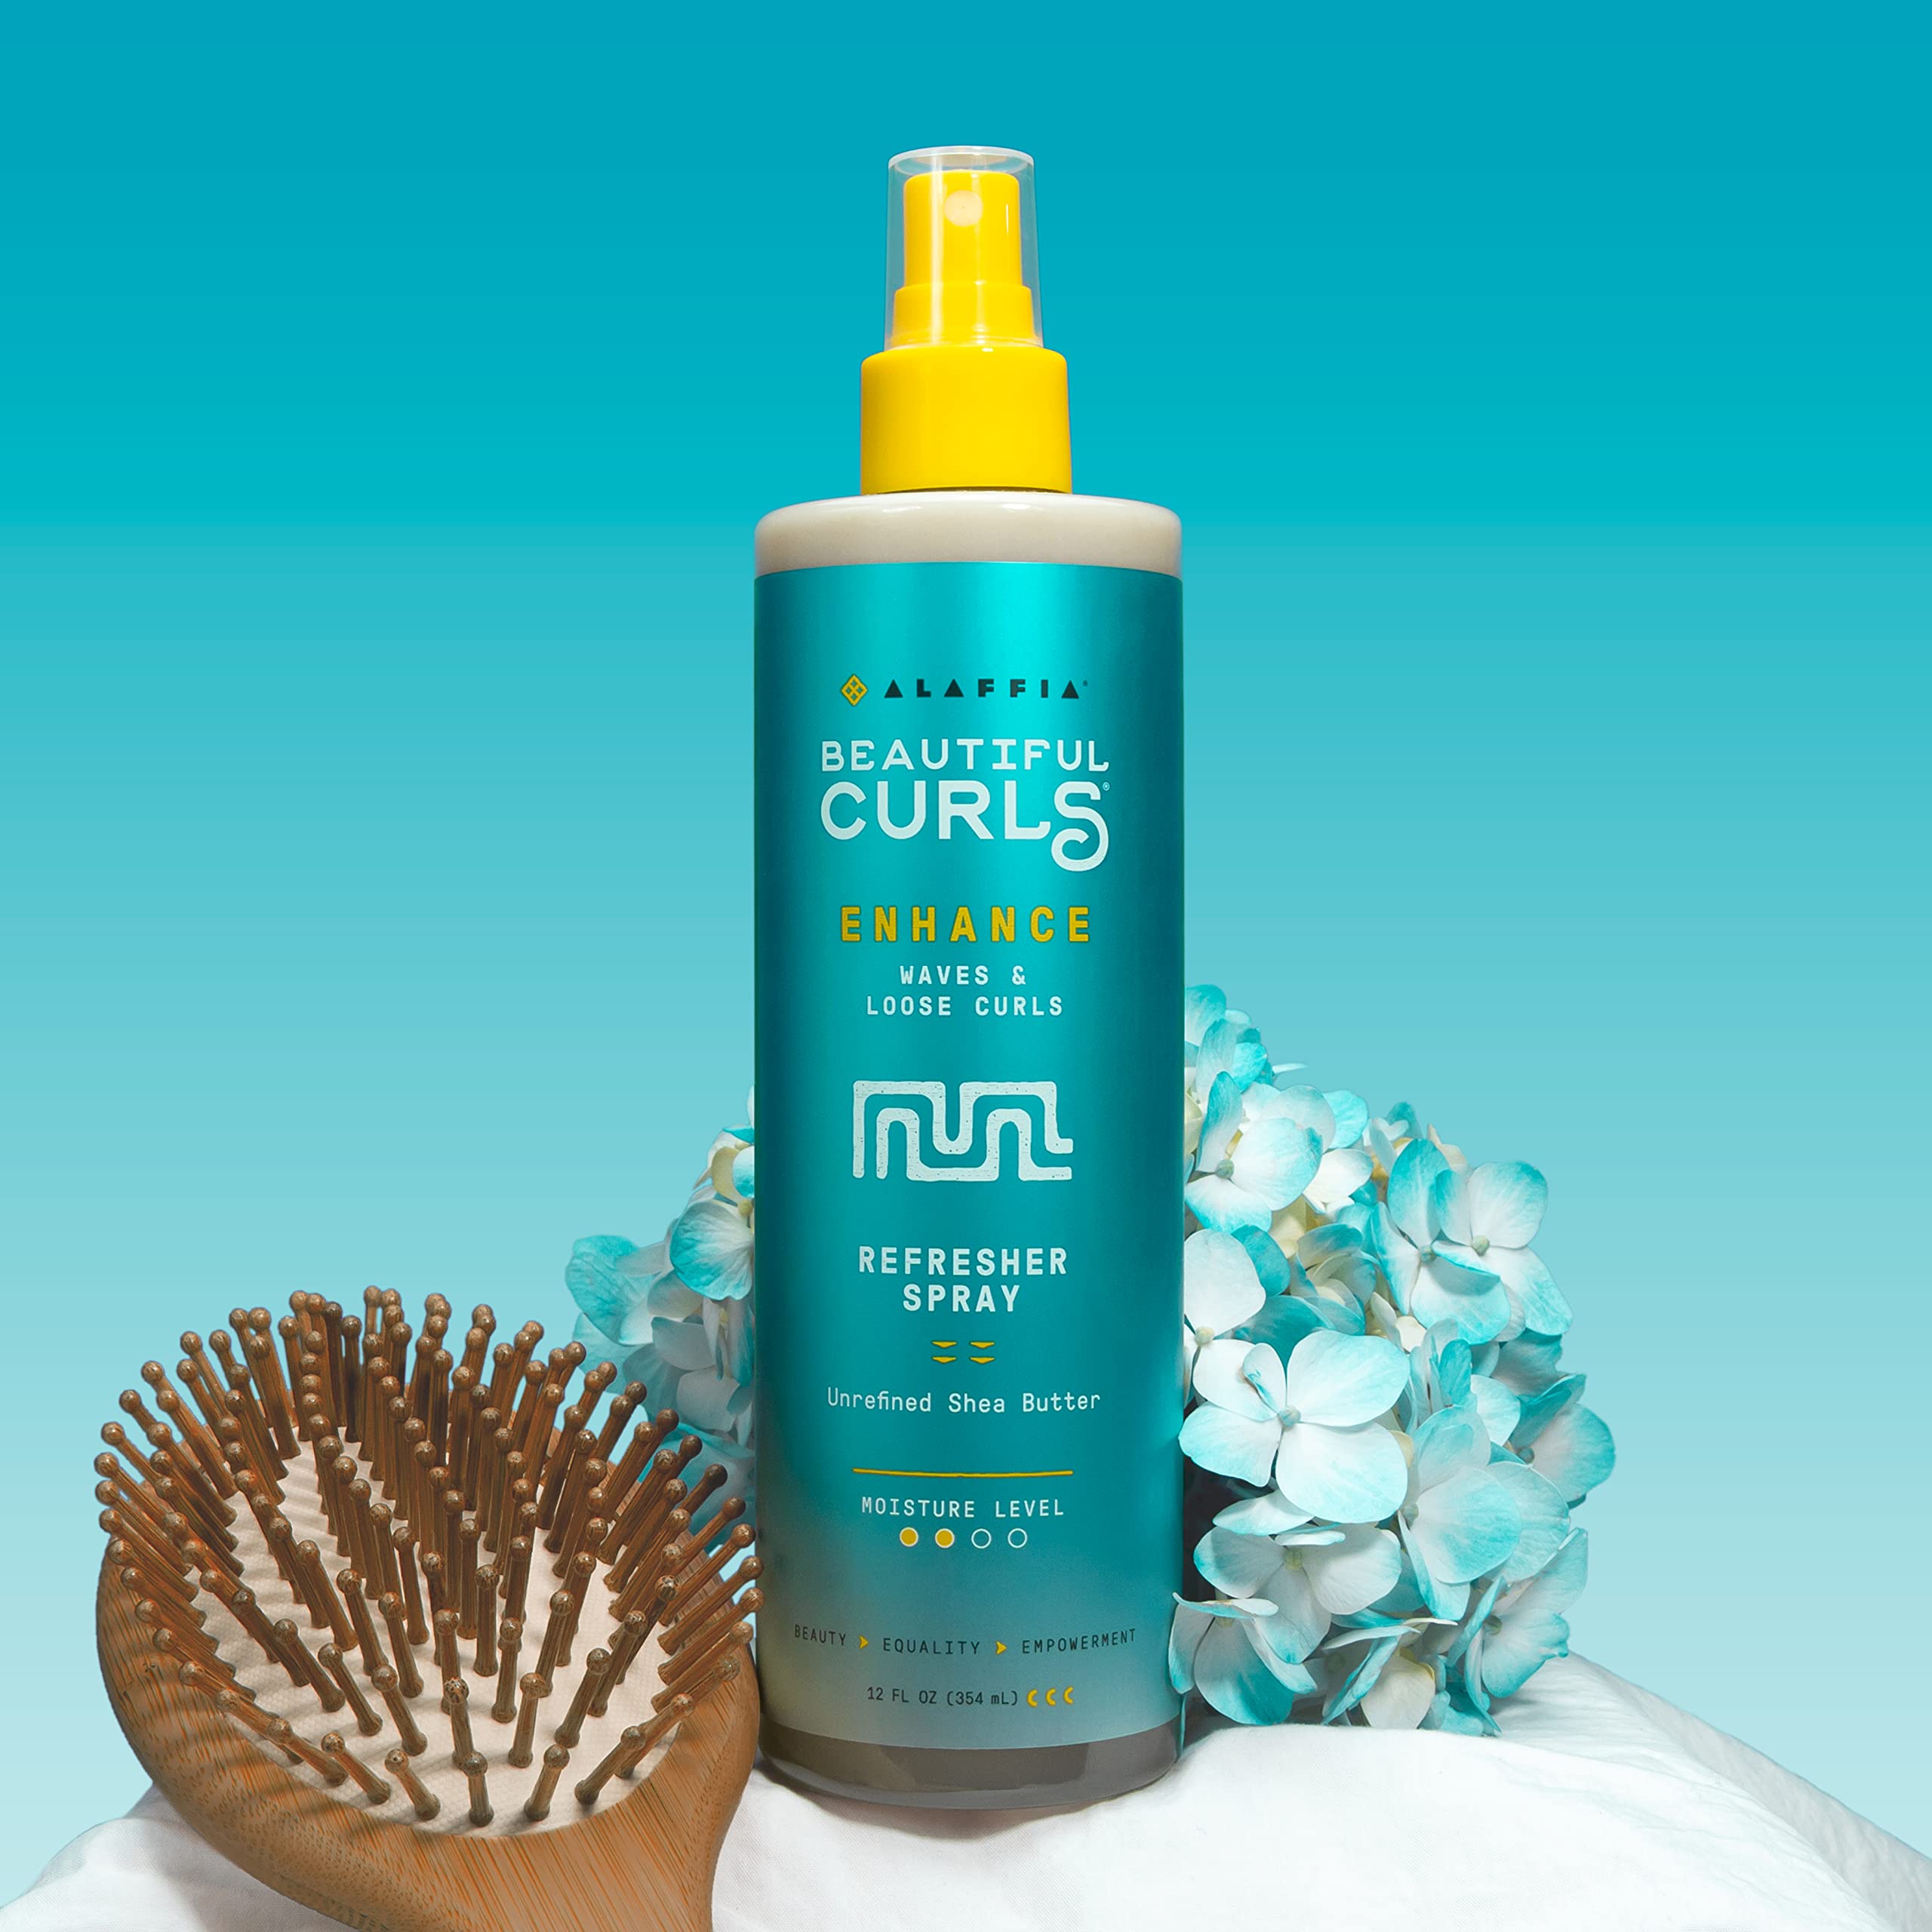 Alaffia Beautiful Curls Curl Reviving Tonic for All Curl Types, with Shea Butter, 12 fl oz - image 5 of 8